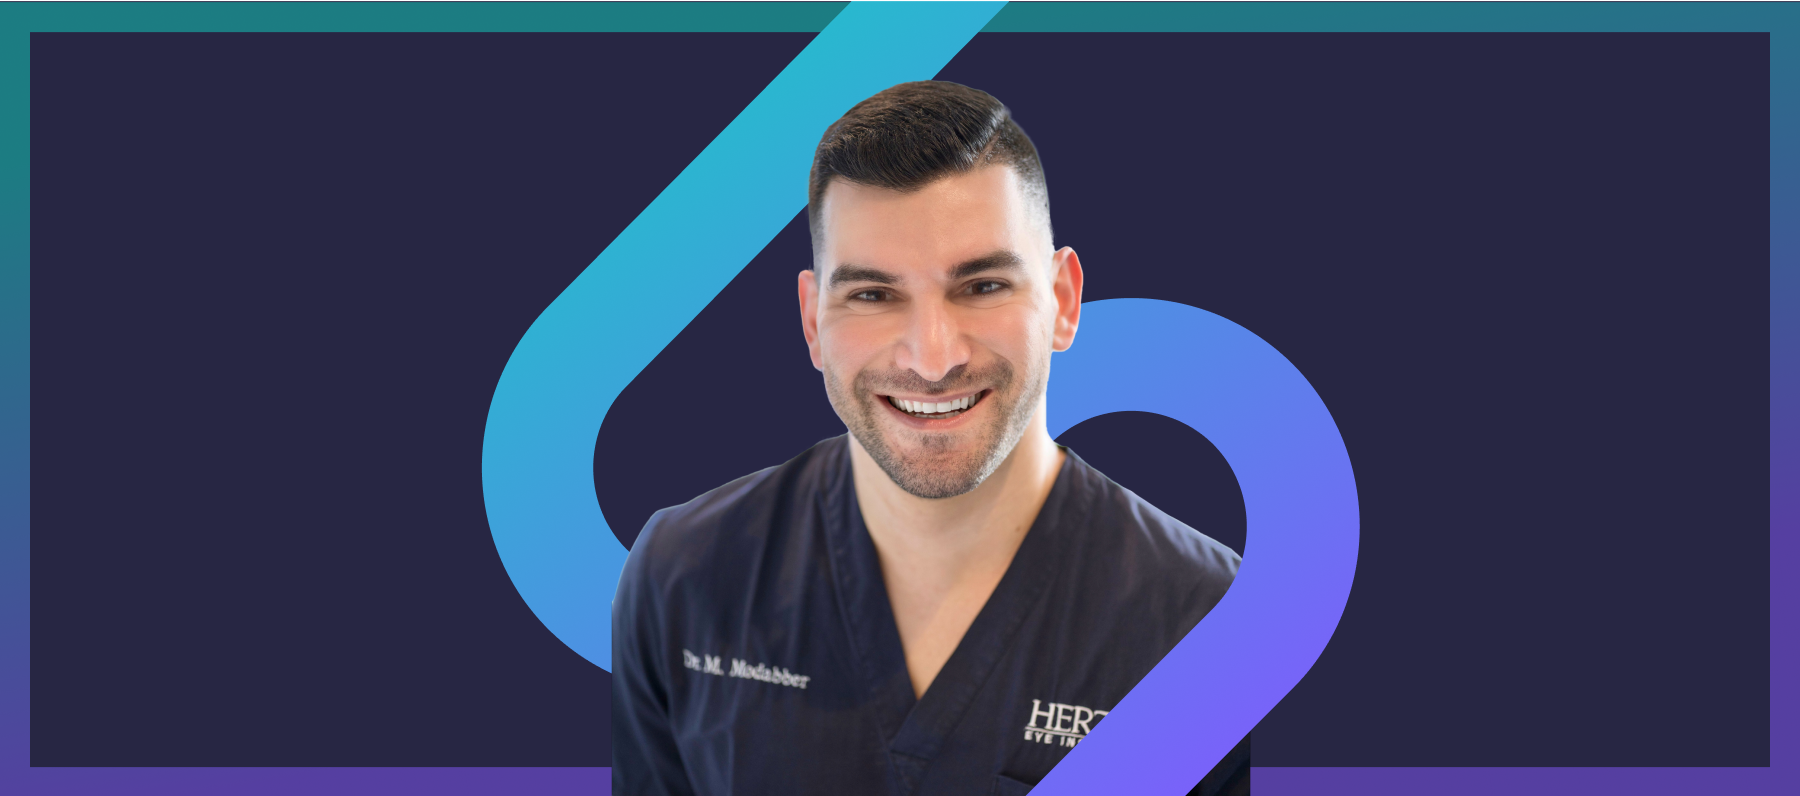 Career Pathways: From Physician to Instructor with Dr. Milad Modabber